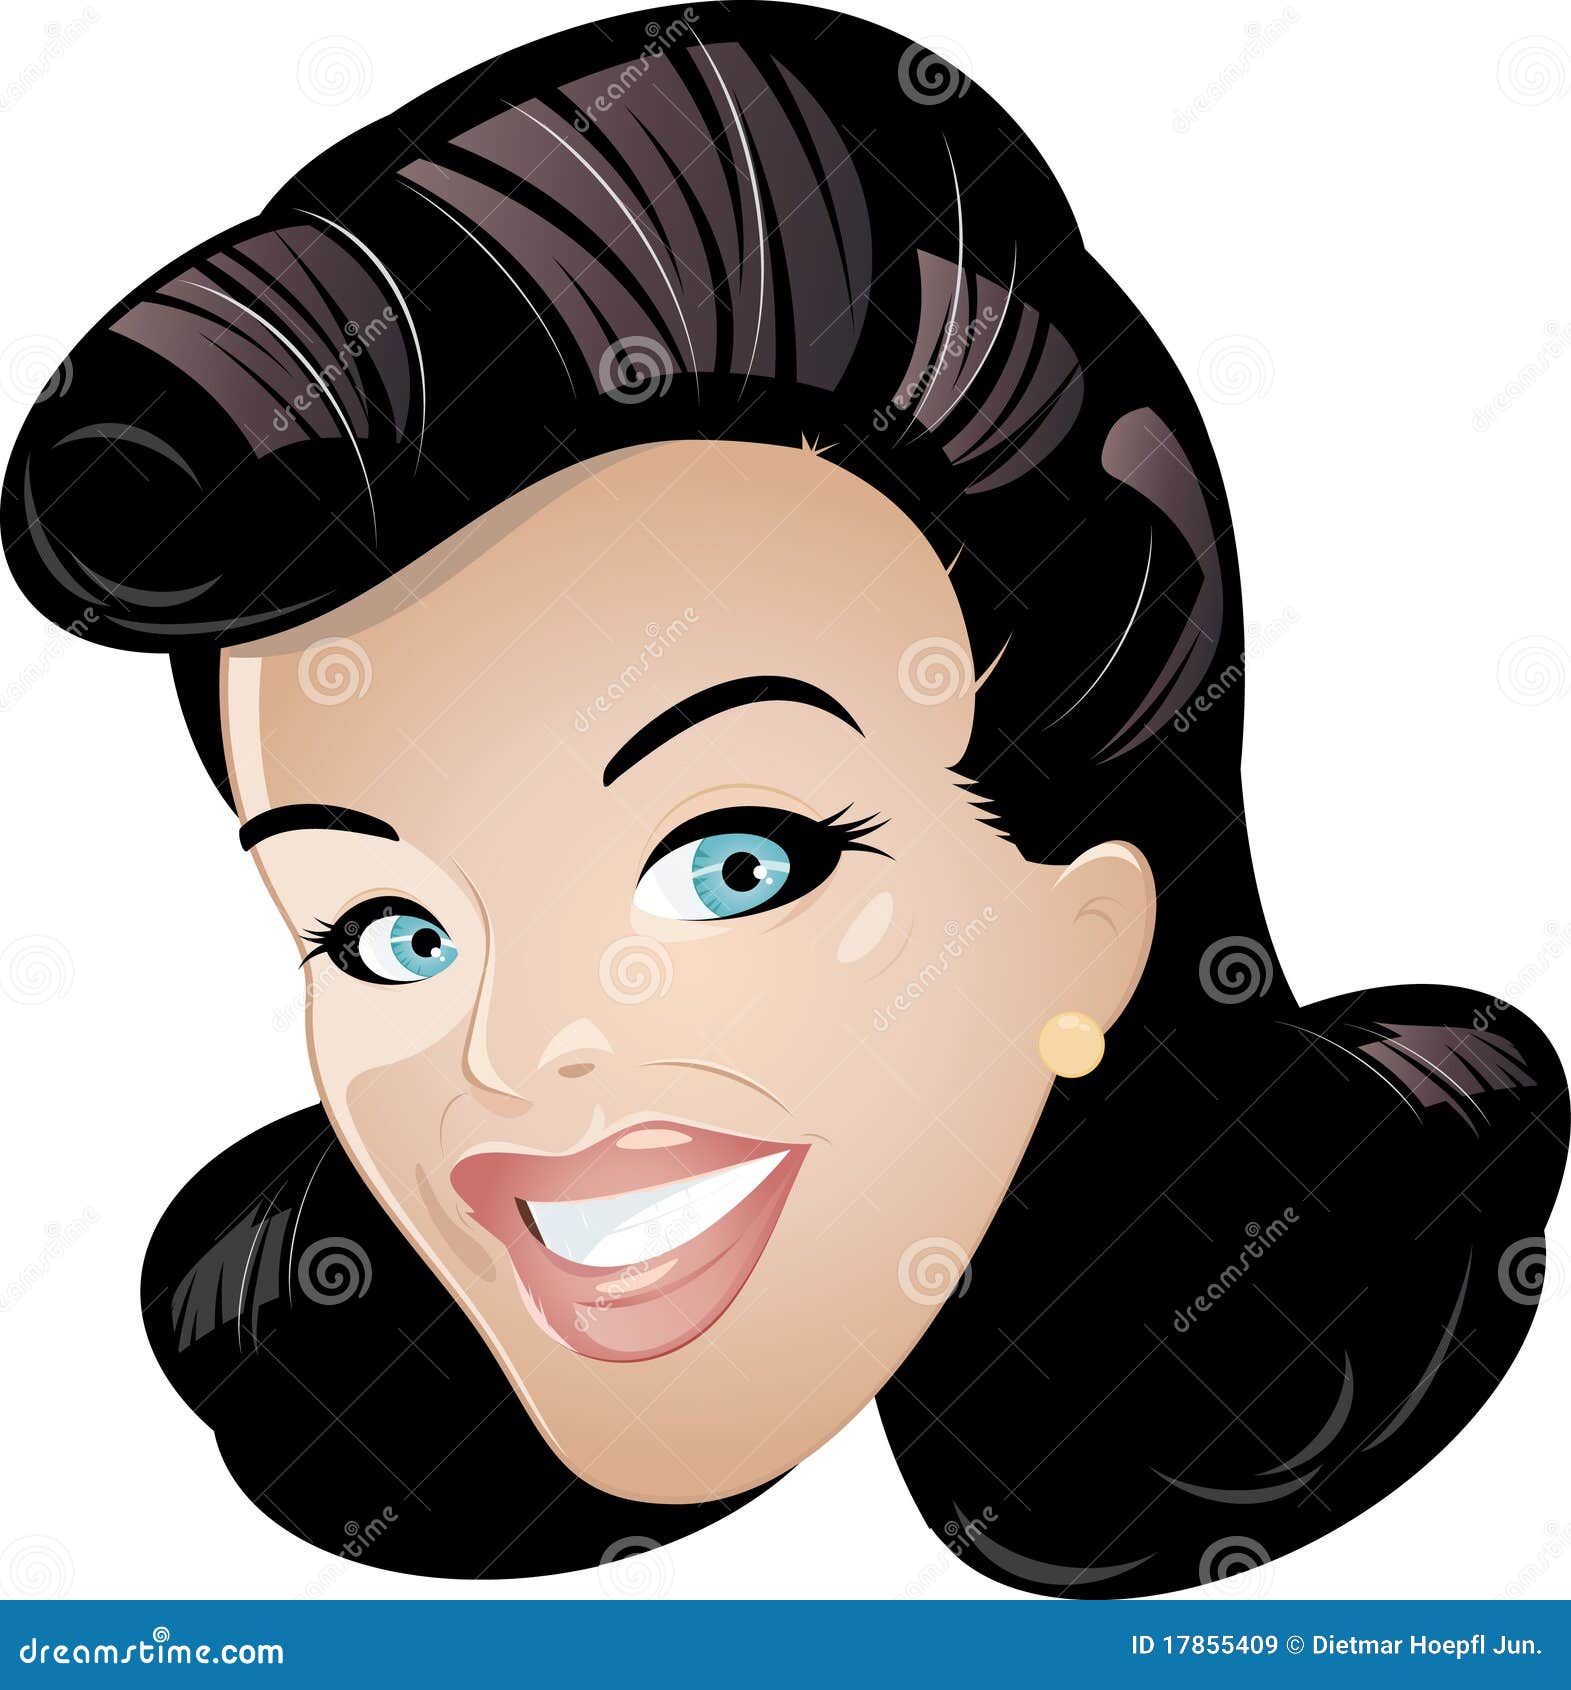 Smiling Cartoon Woman Royalty Free Stock Images - Image 